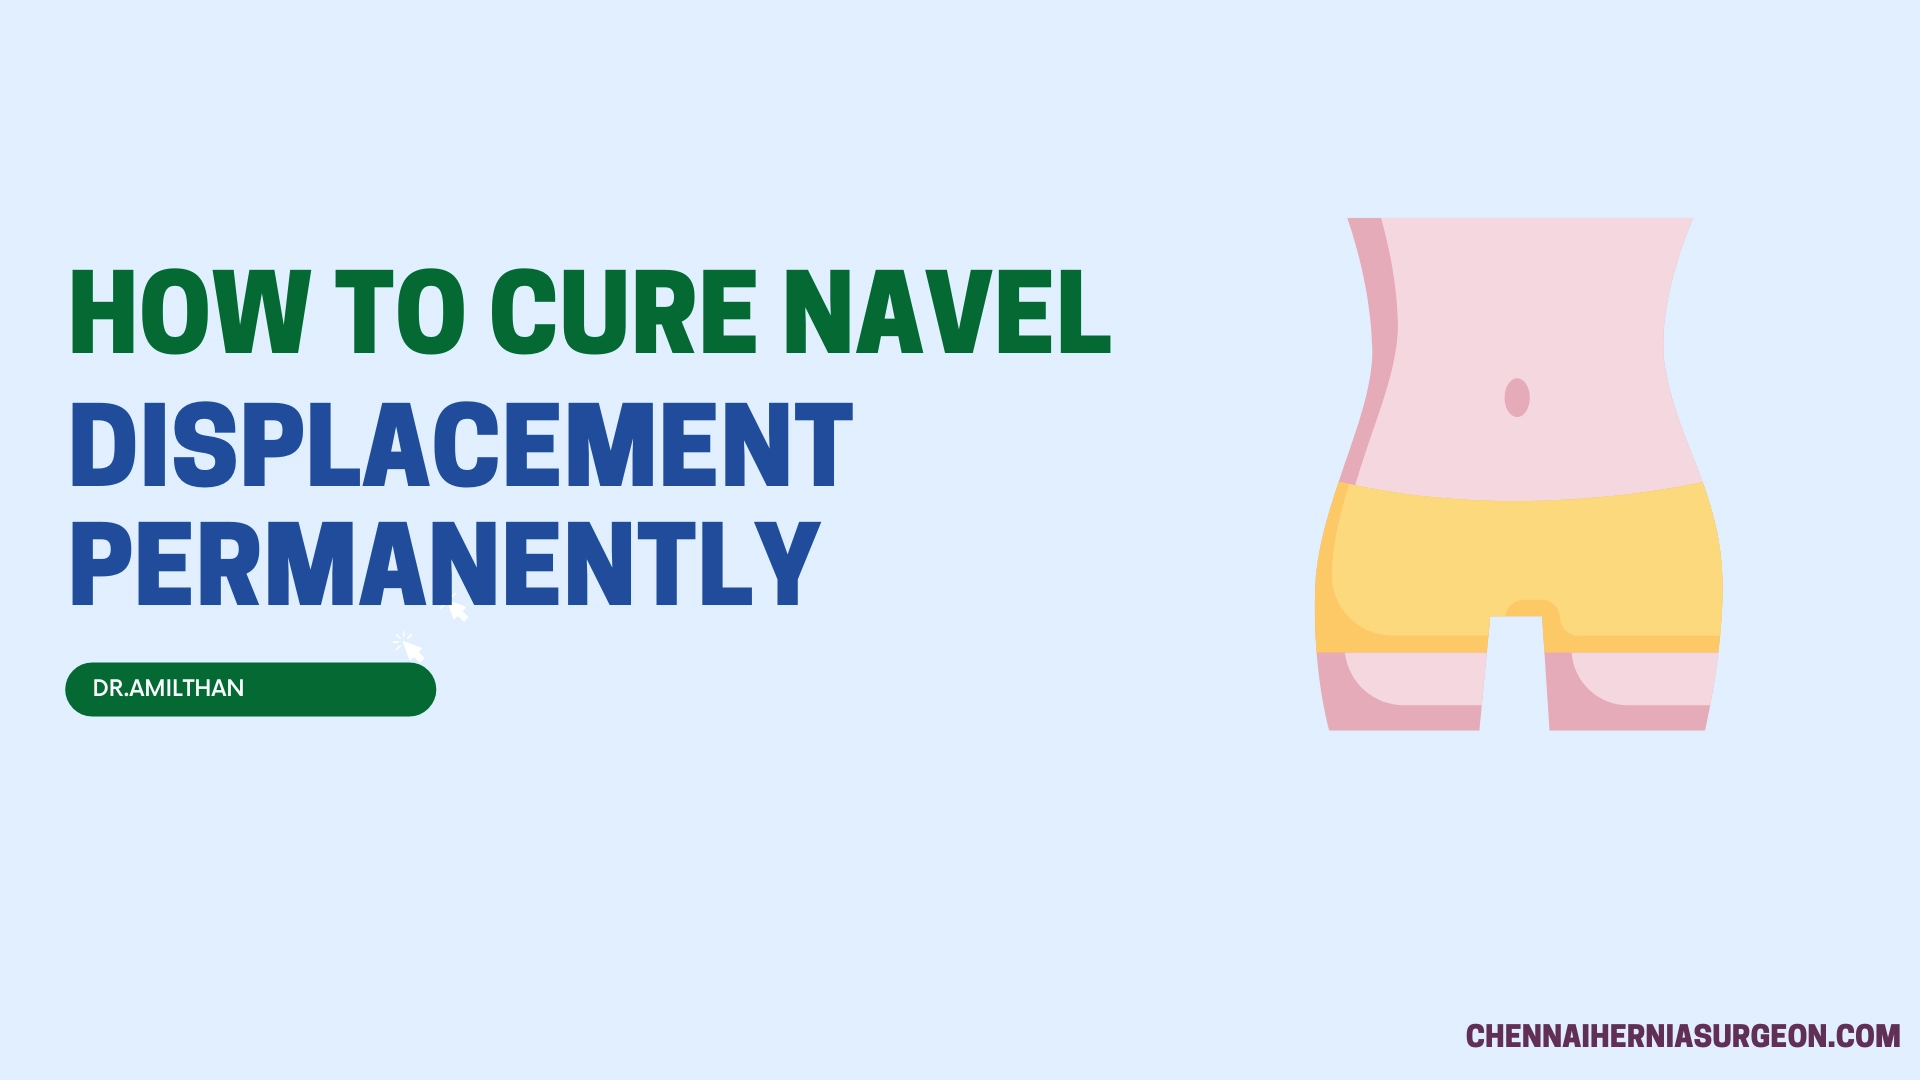 How to cure navel displacement permanently